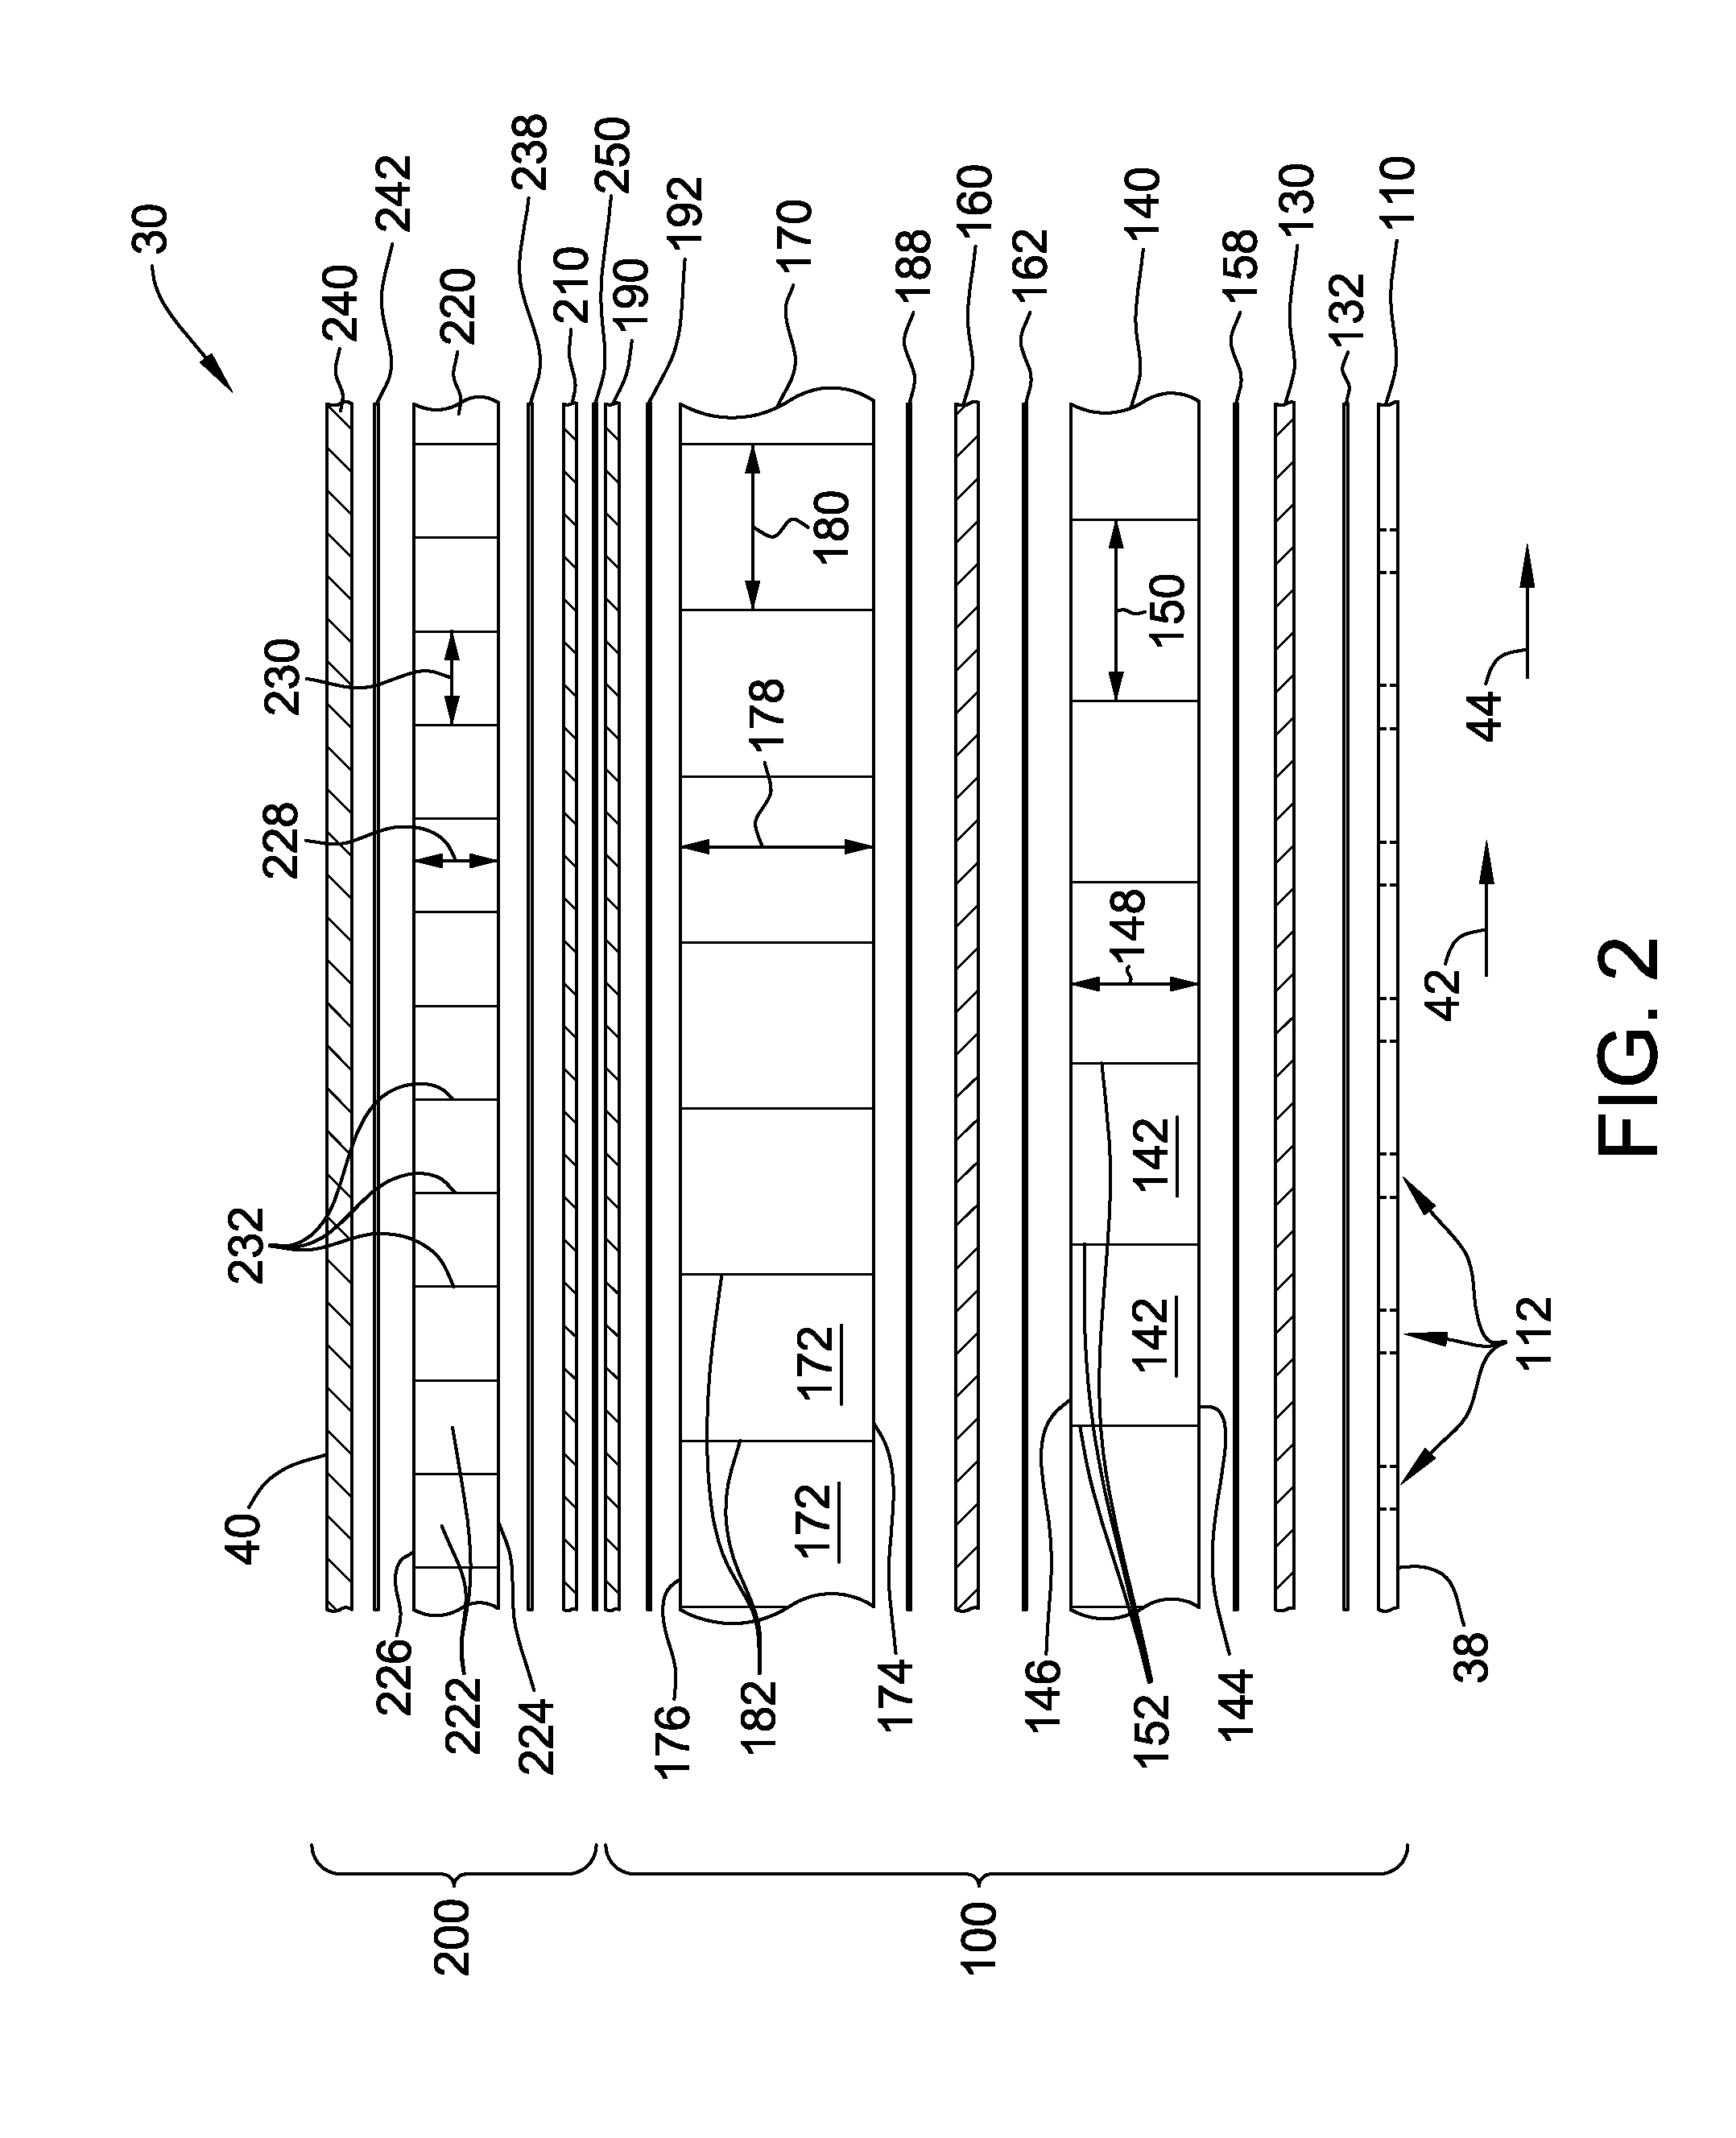 Methods and apparatus for noise attenuation in an engine nacelle